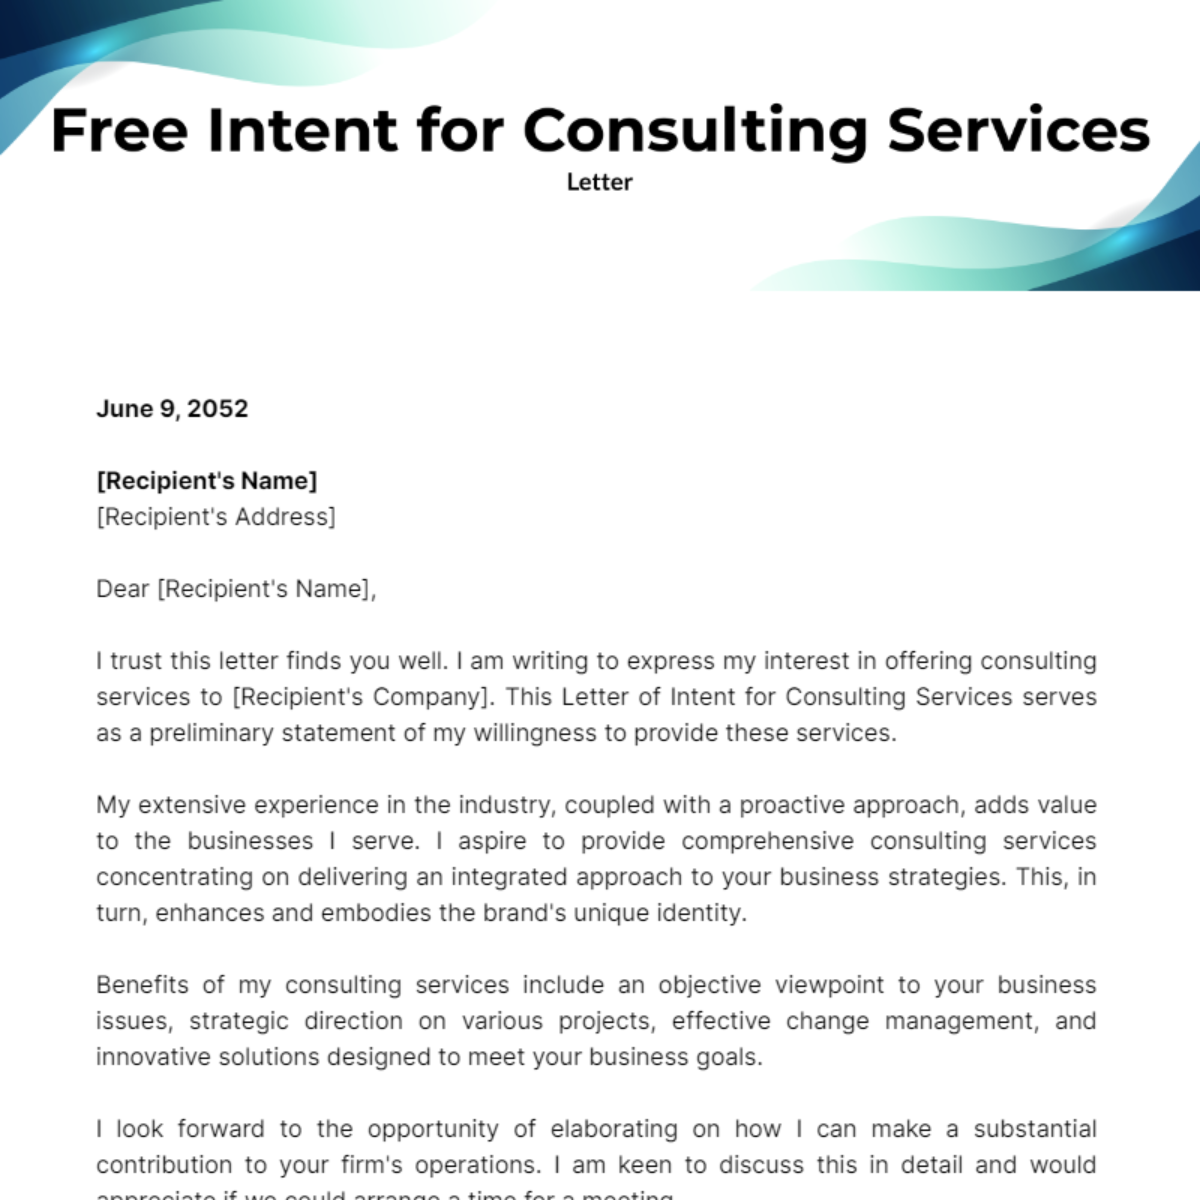 Letter of Intent for Consulting Services Template